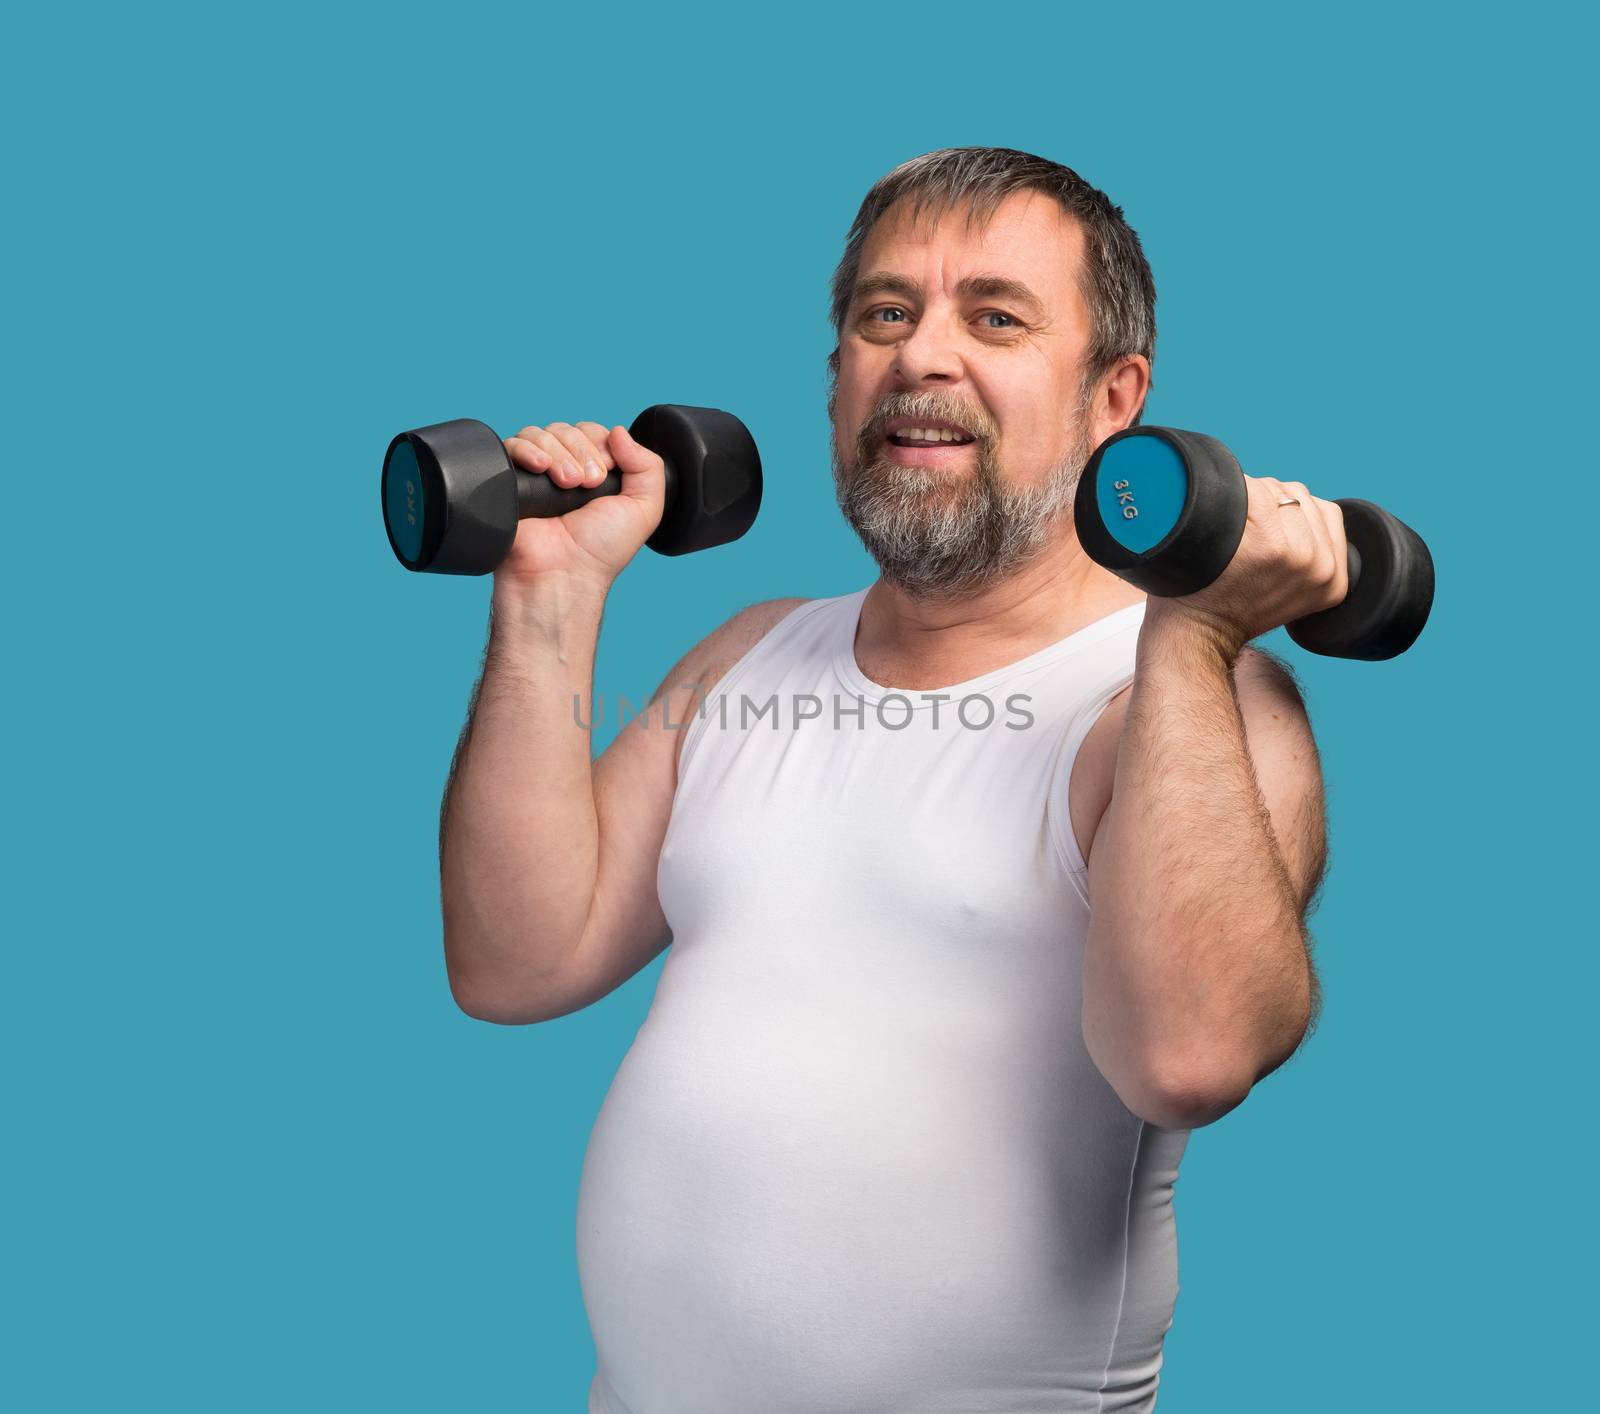 Middle-aged man with a paunch exercising with dumbbells on blue background